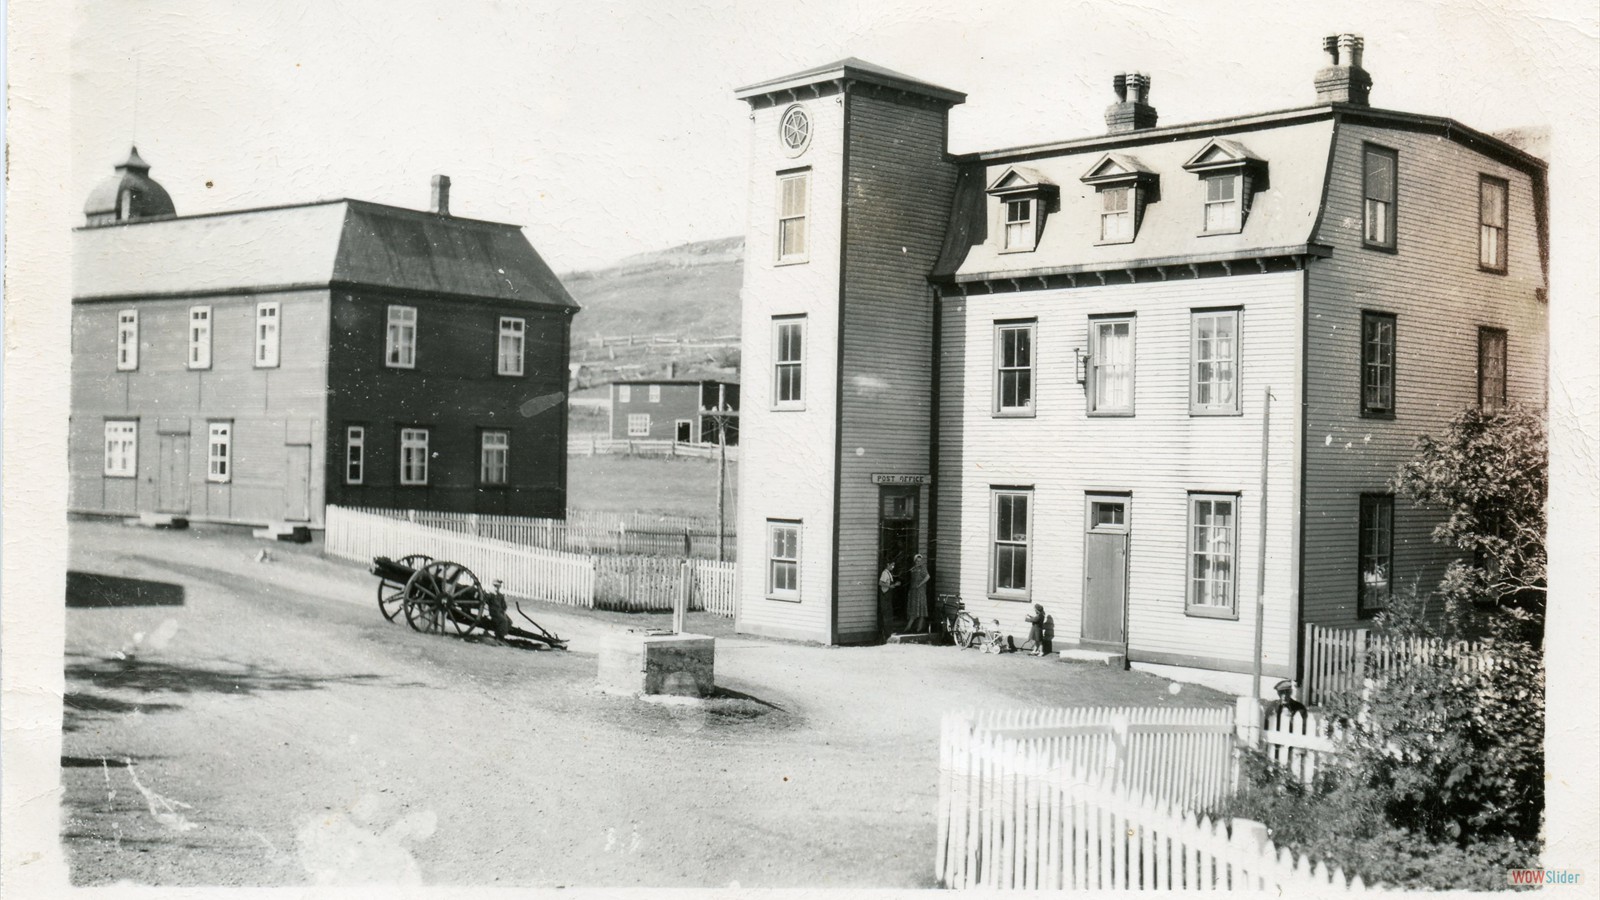 Parish Hall and Court House with the Green Family Forge in the distance in the middle of photo, after 1950